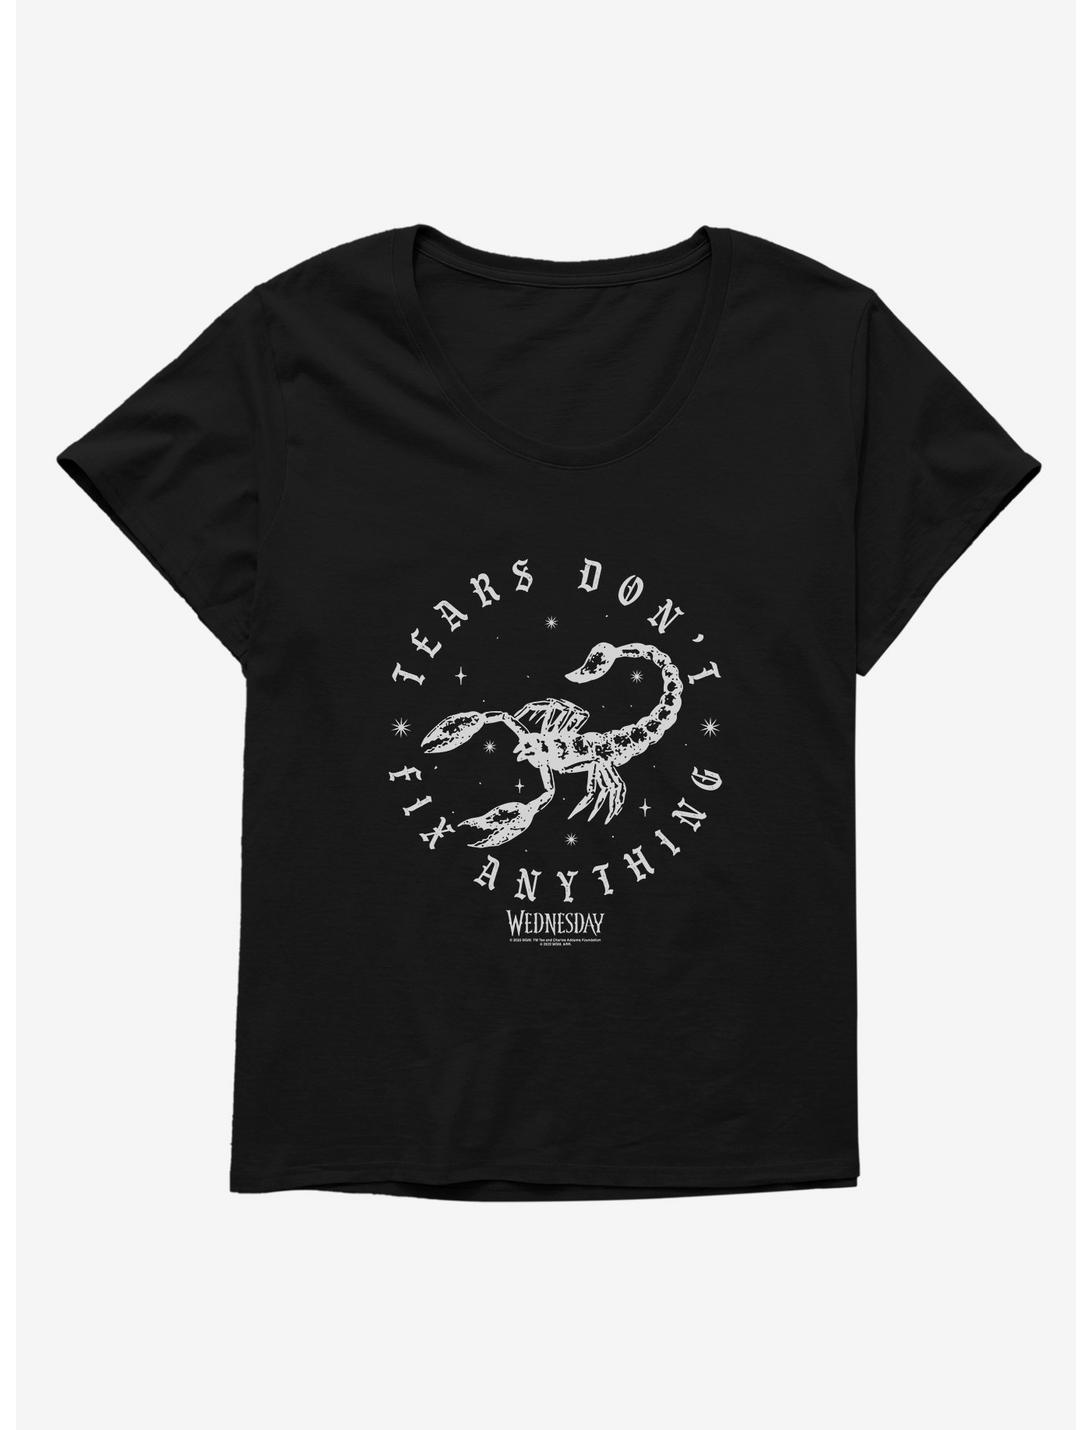 Wednesday Tears Don't Fix Anything Womens T-Shirt Plus Size, BLACK, hi-res